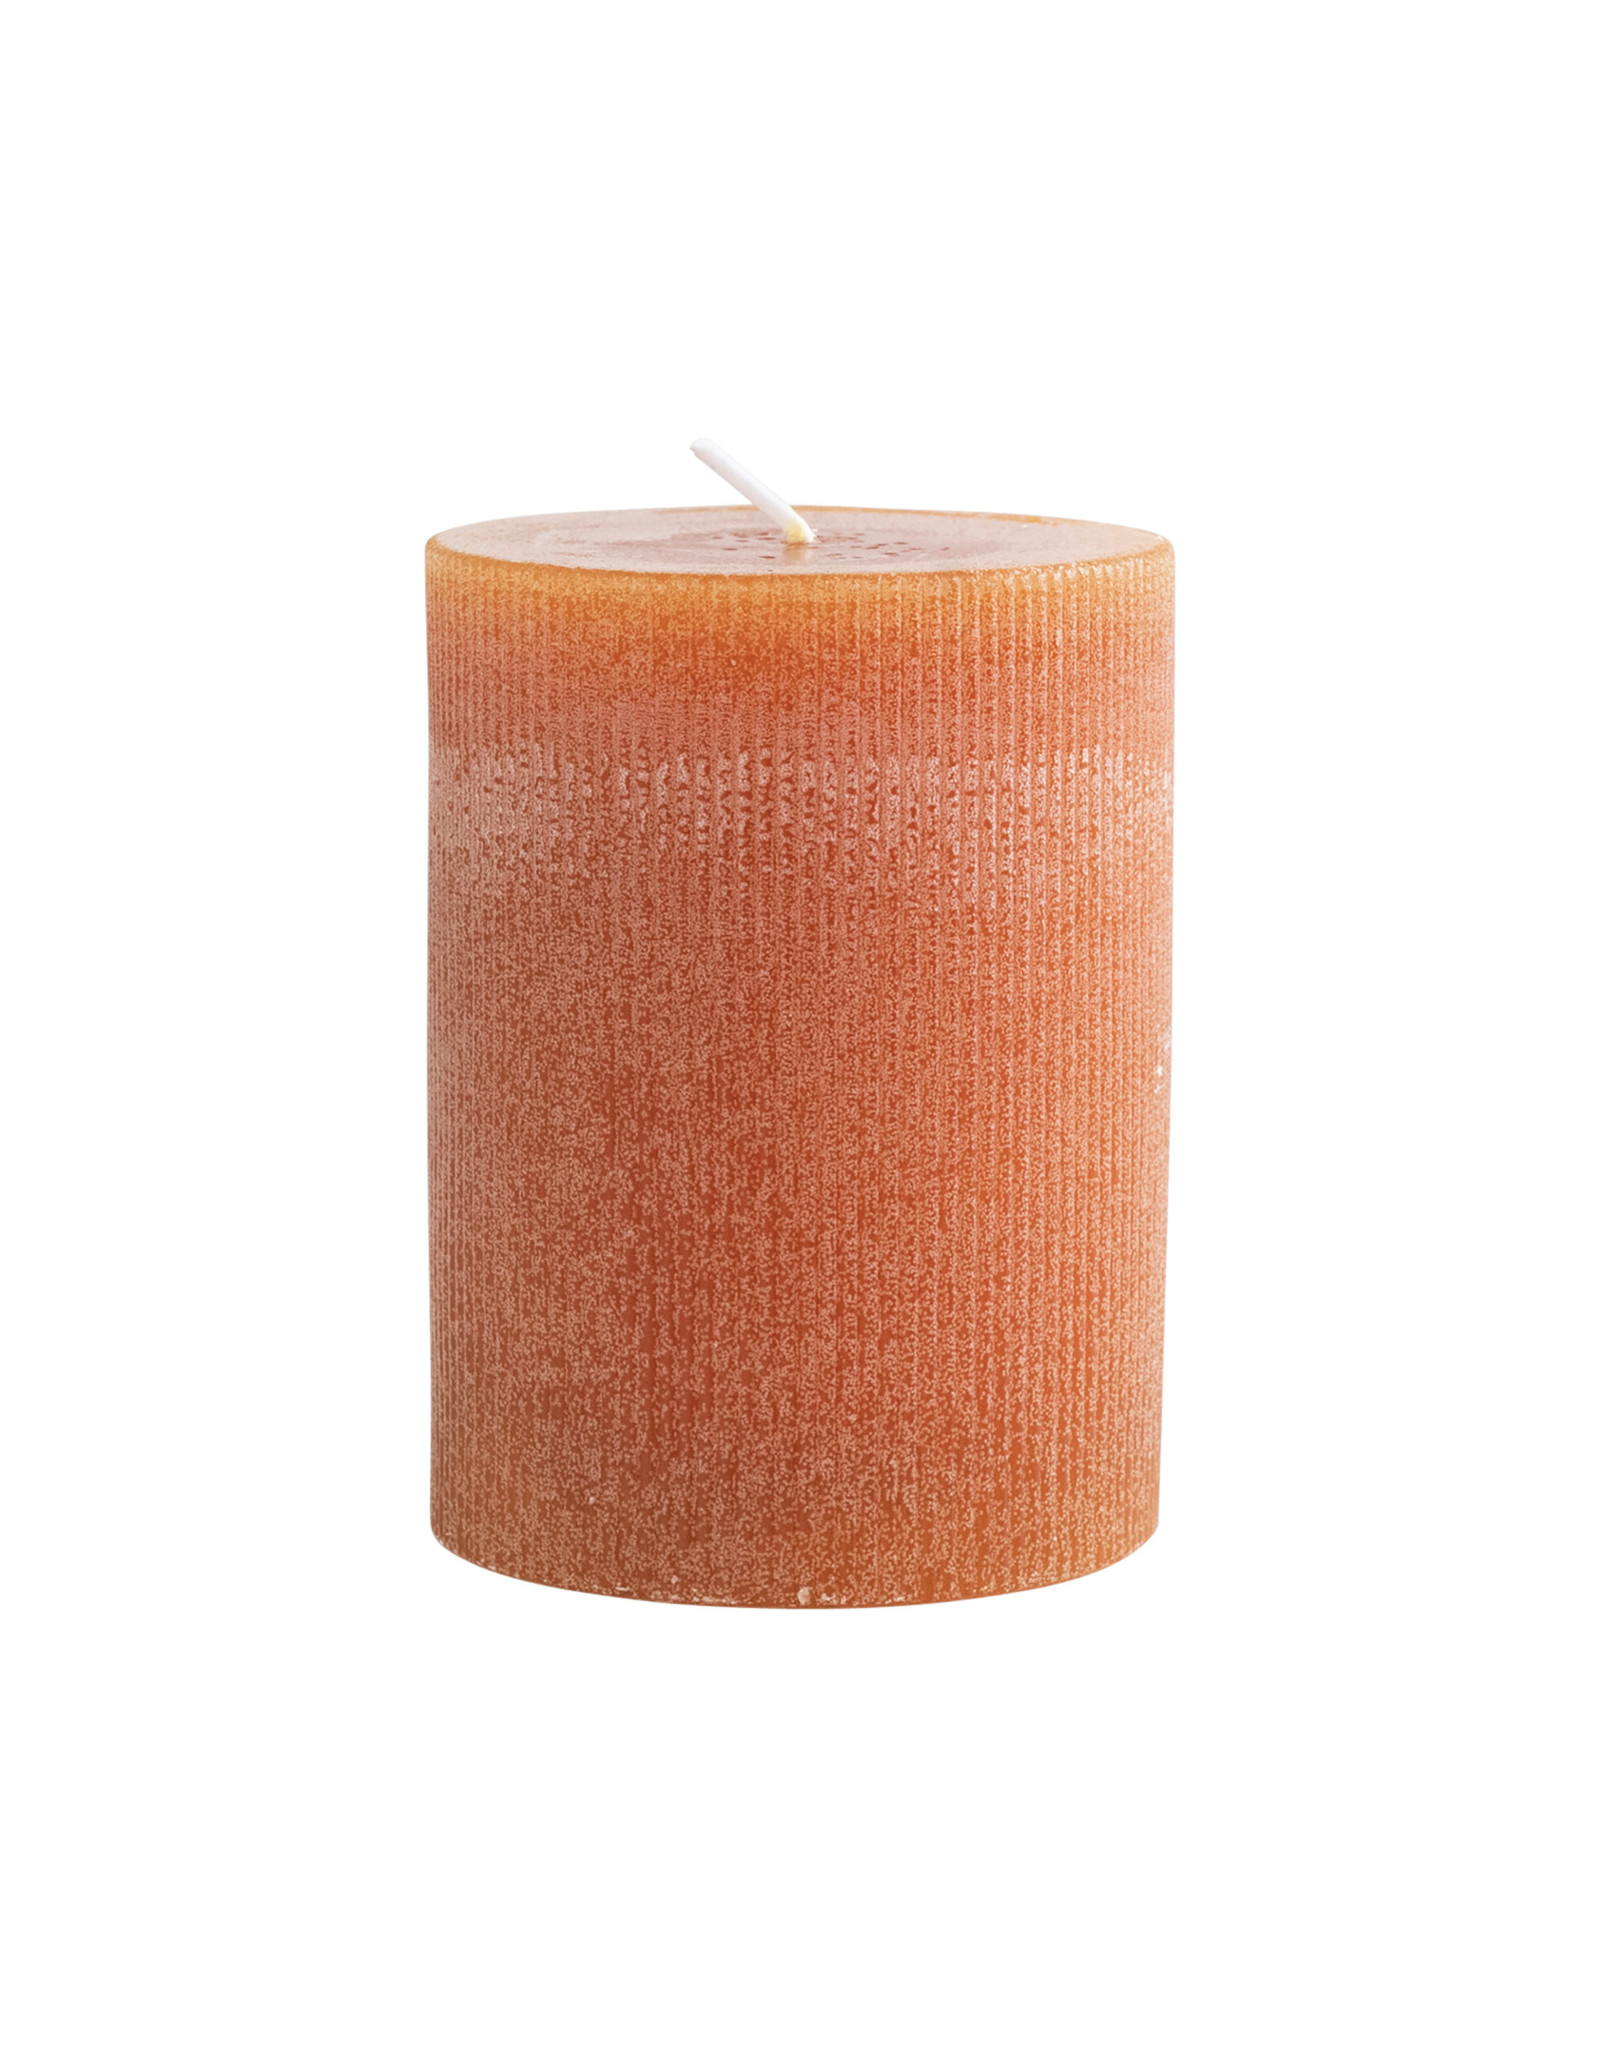 XM9779 Unscented Pleated Pillar Candle 3" x 4"